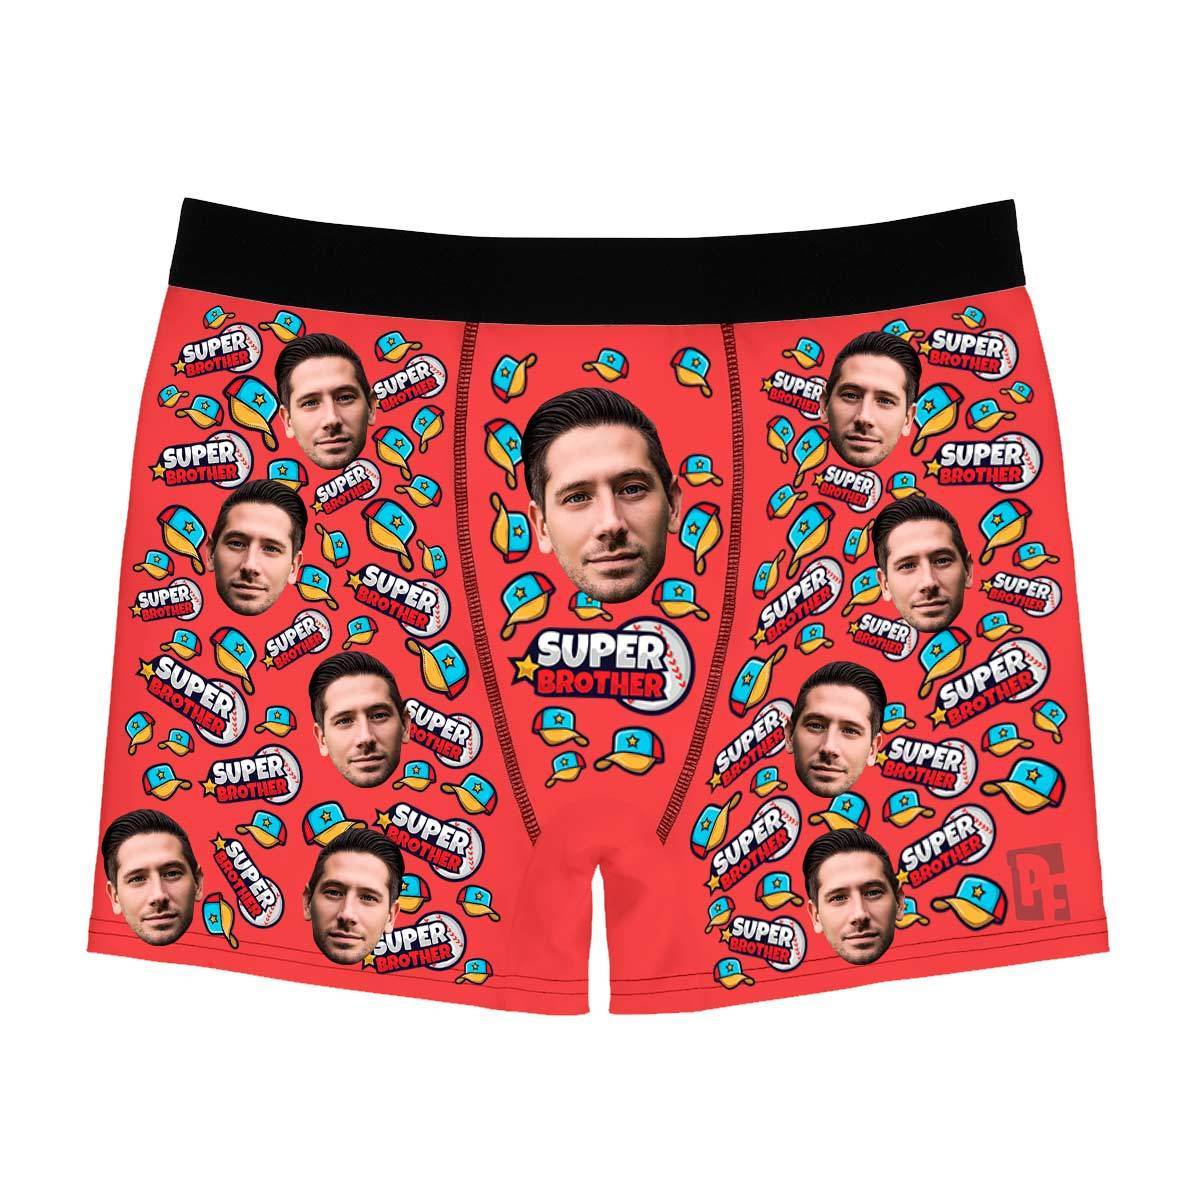 Red Super Brother men's boxer briefs personalized with photo printed on them